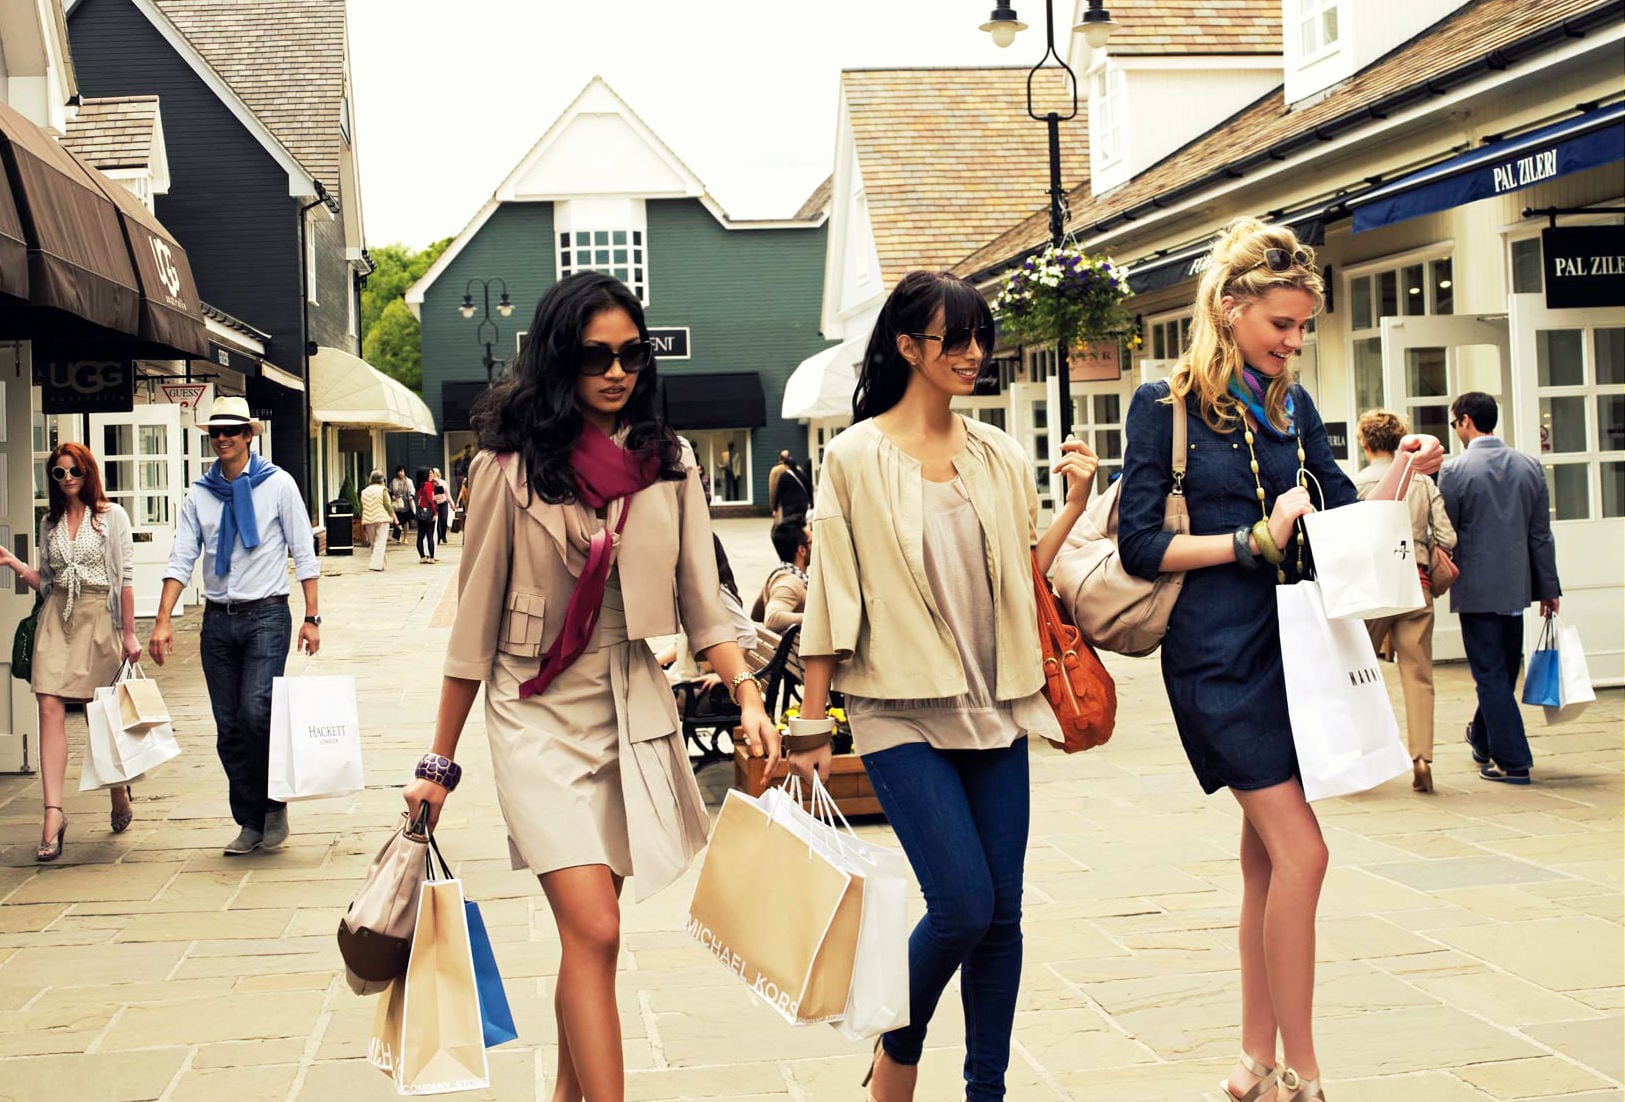 Outlet malls are the new global tourism destinations of Europe